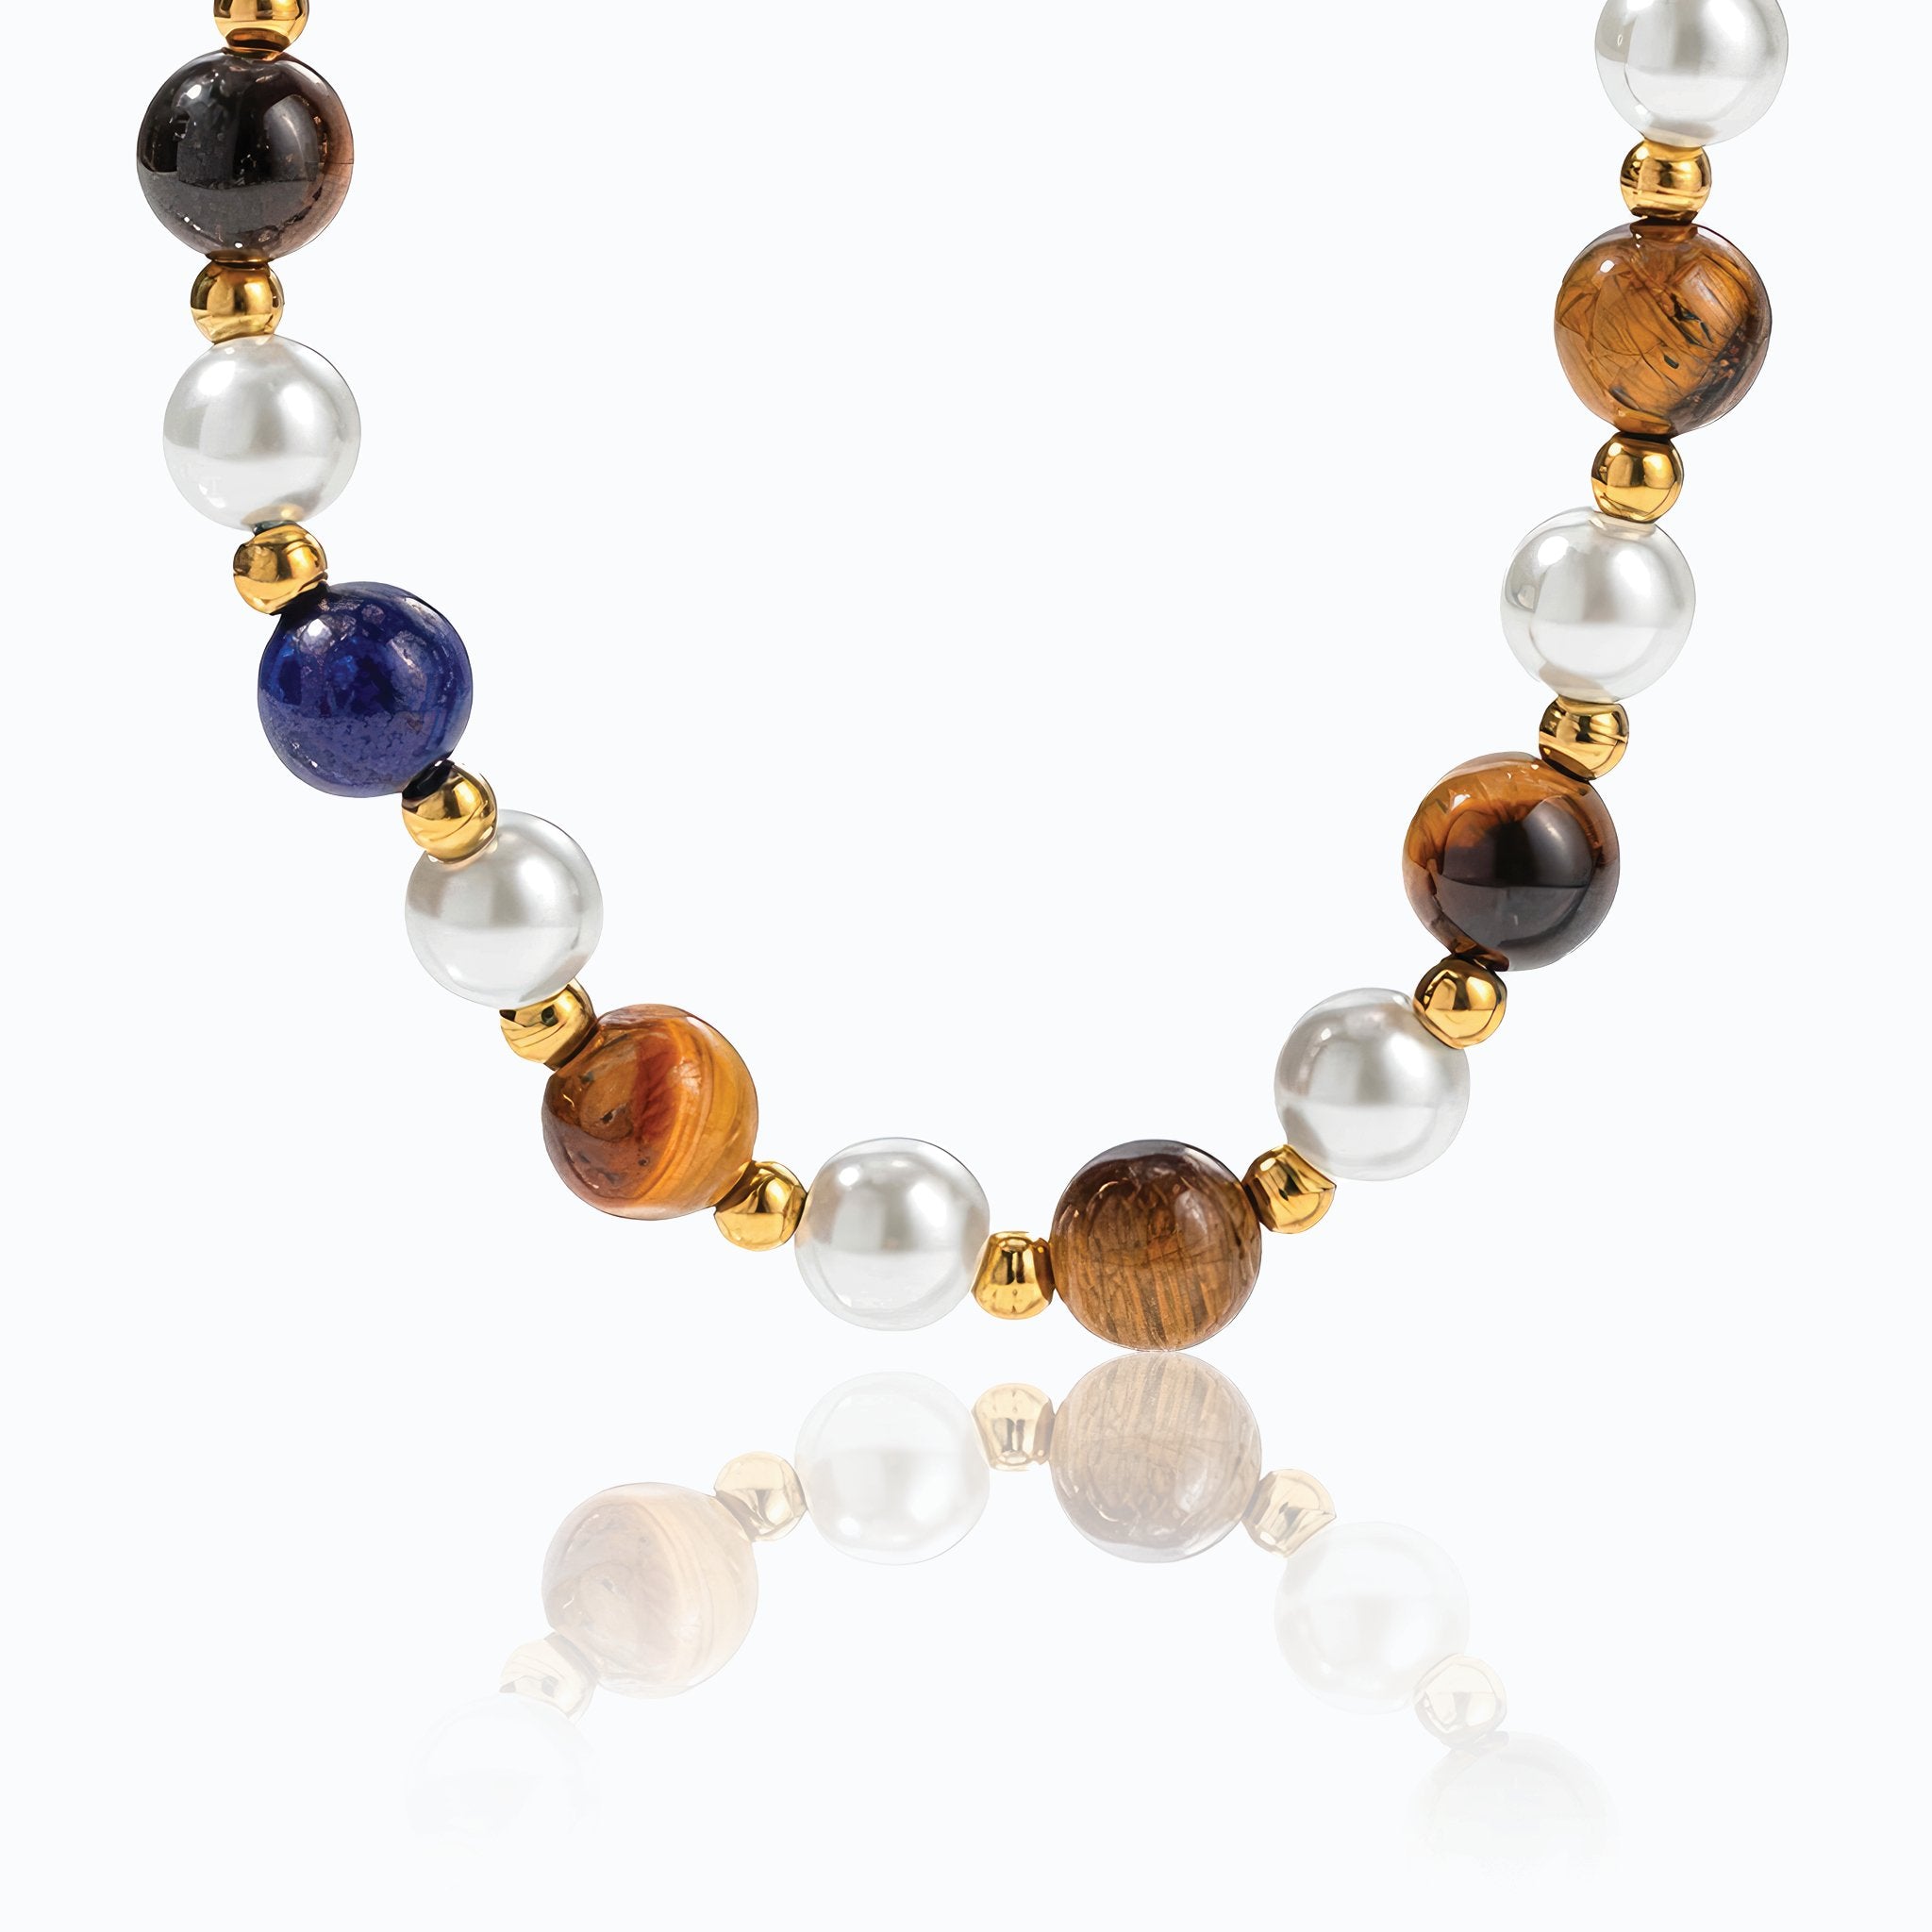 Multi-Gem Noble Necklace - Nobbier - Necklace - 18K Gold And Titanium PVD Coated Jewelry